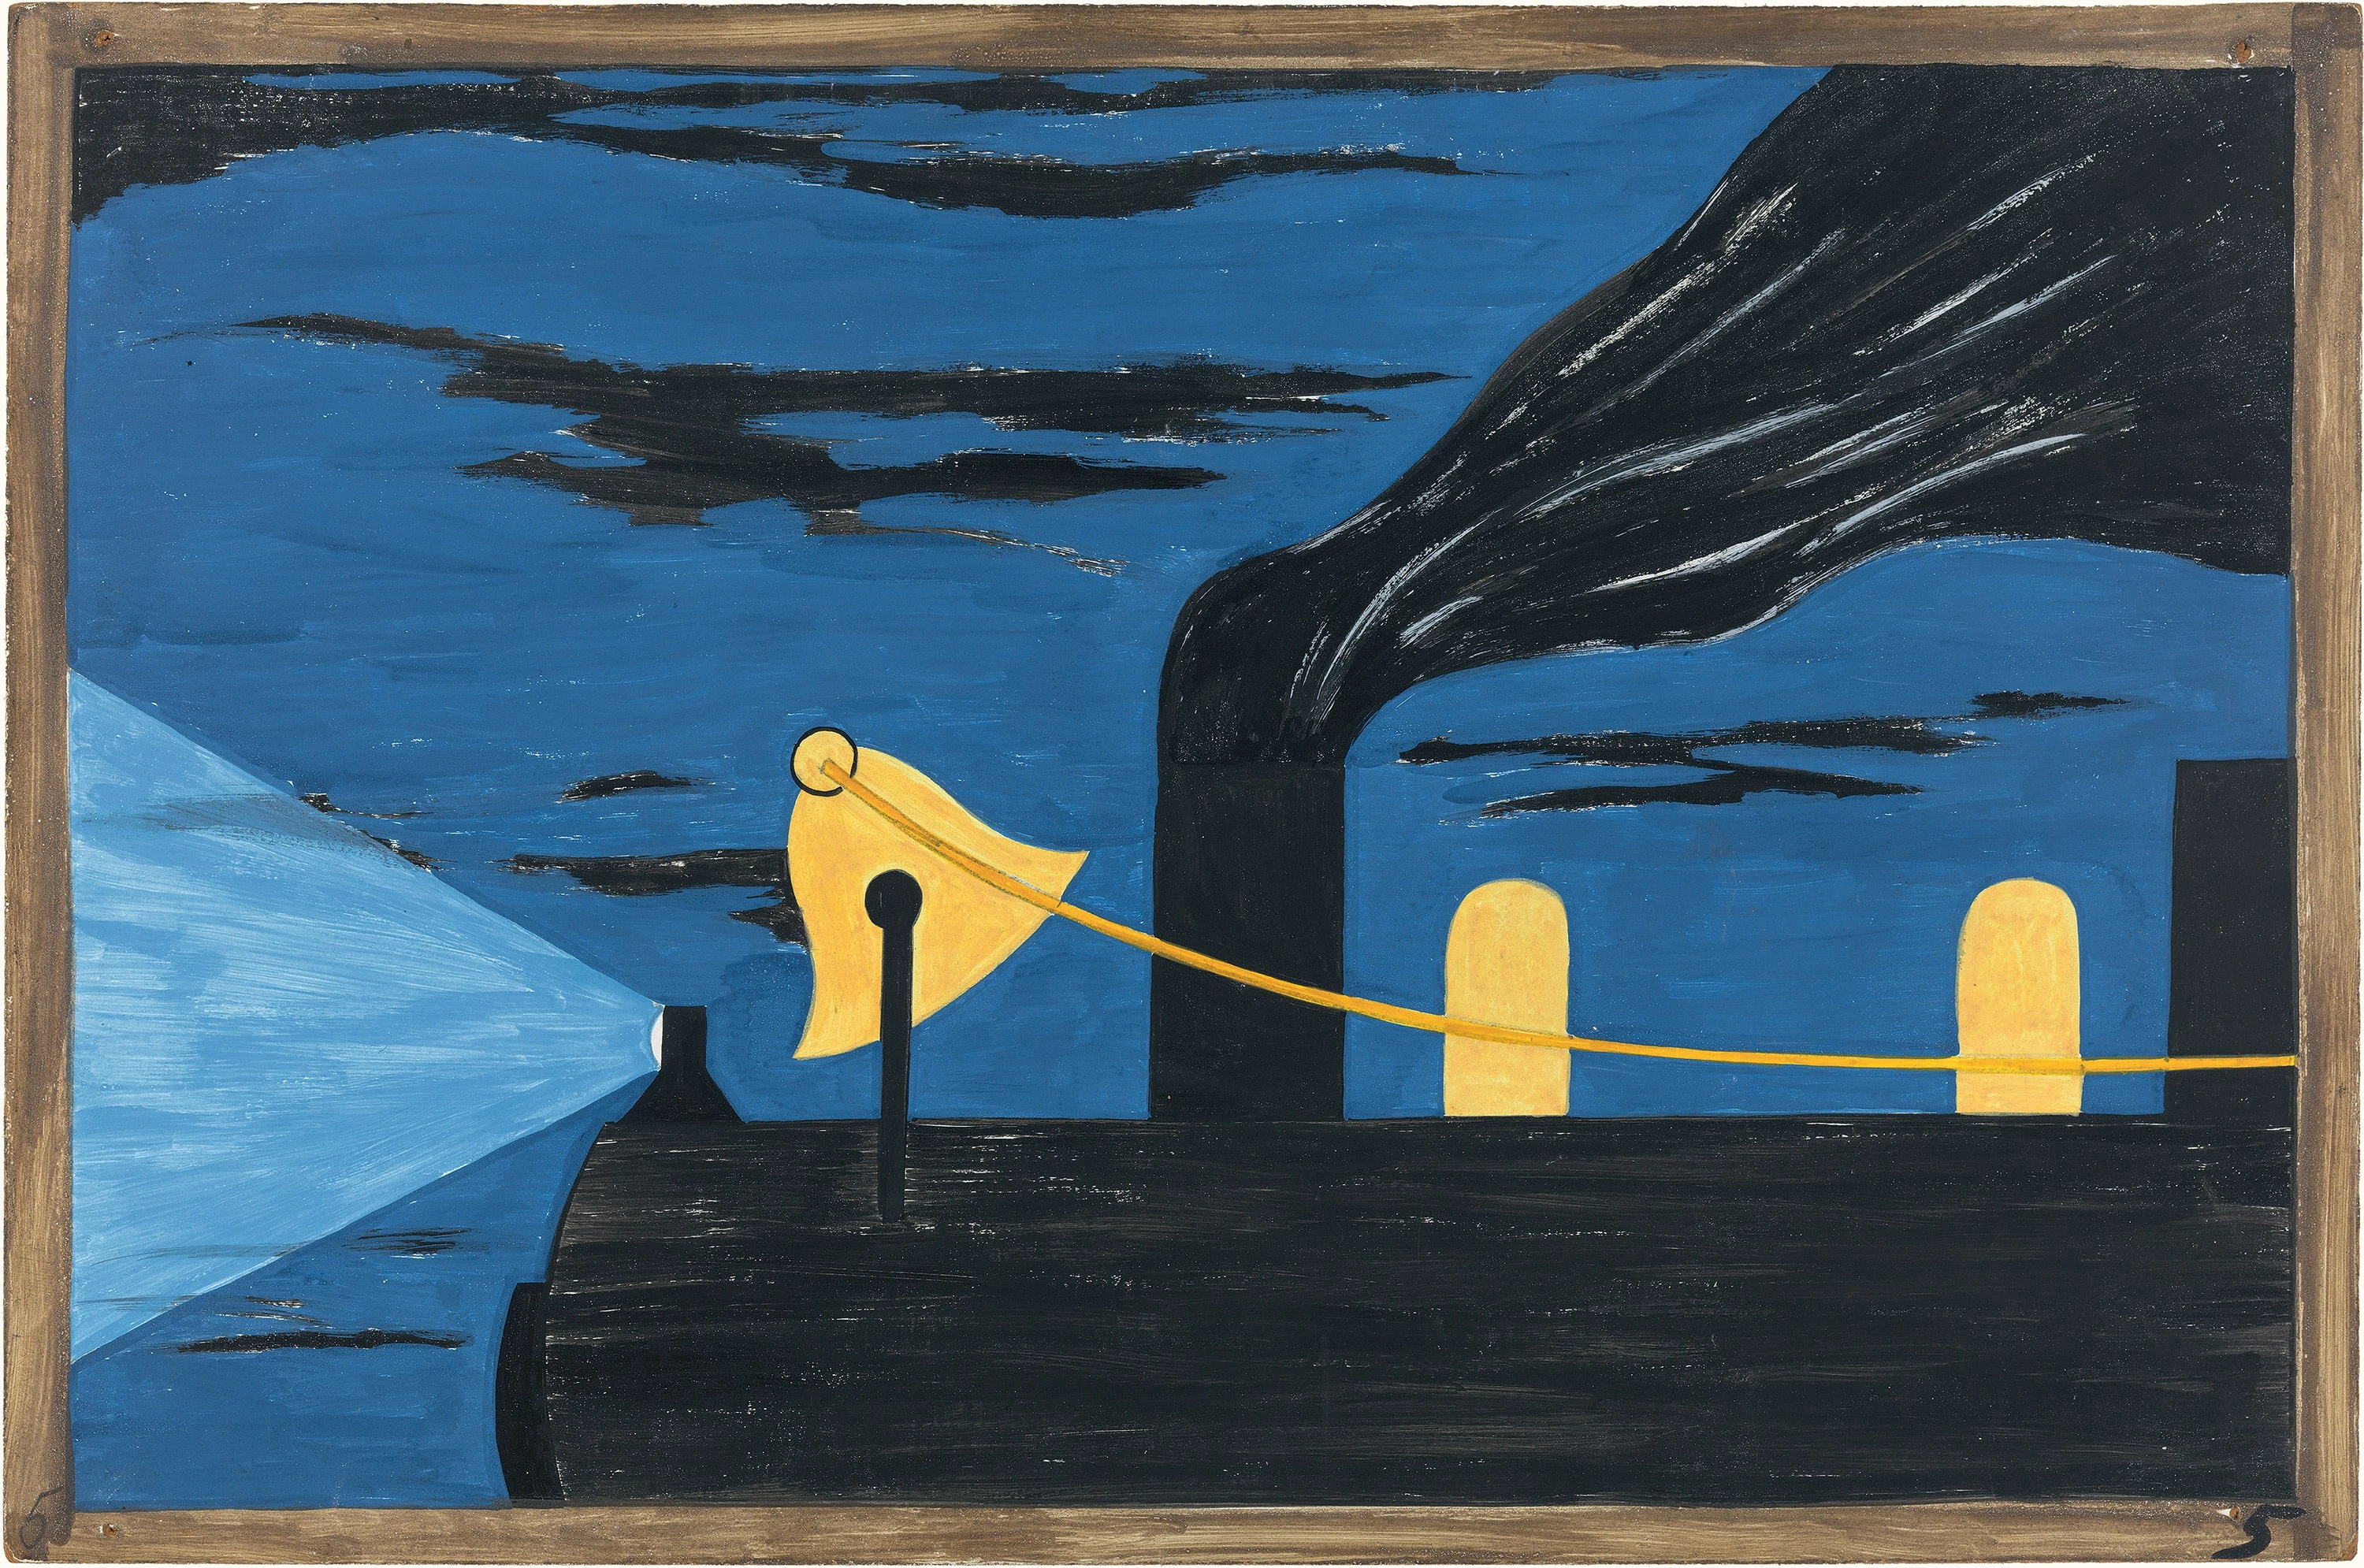 Migration Series No.5: Migrants were advanced passage on the railroads, paid for by northern industry. Northern industry was to be repaid by the migrants out of their future wages, Jacob Lawrence